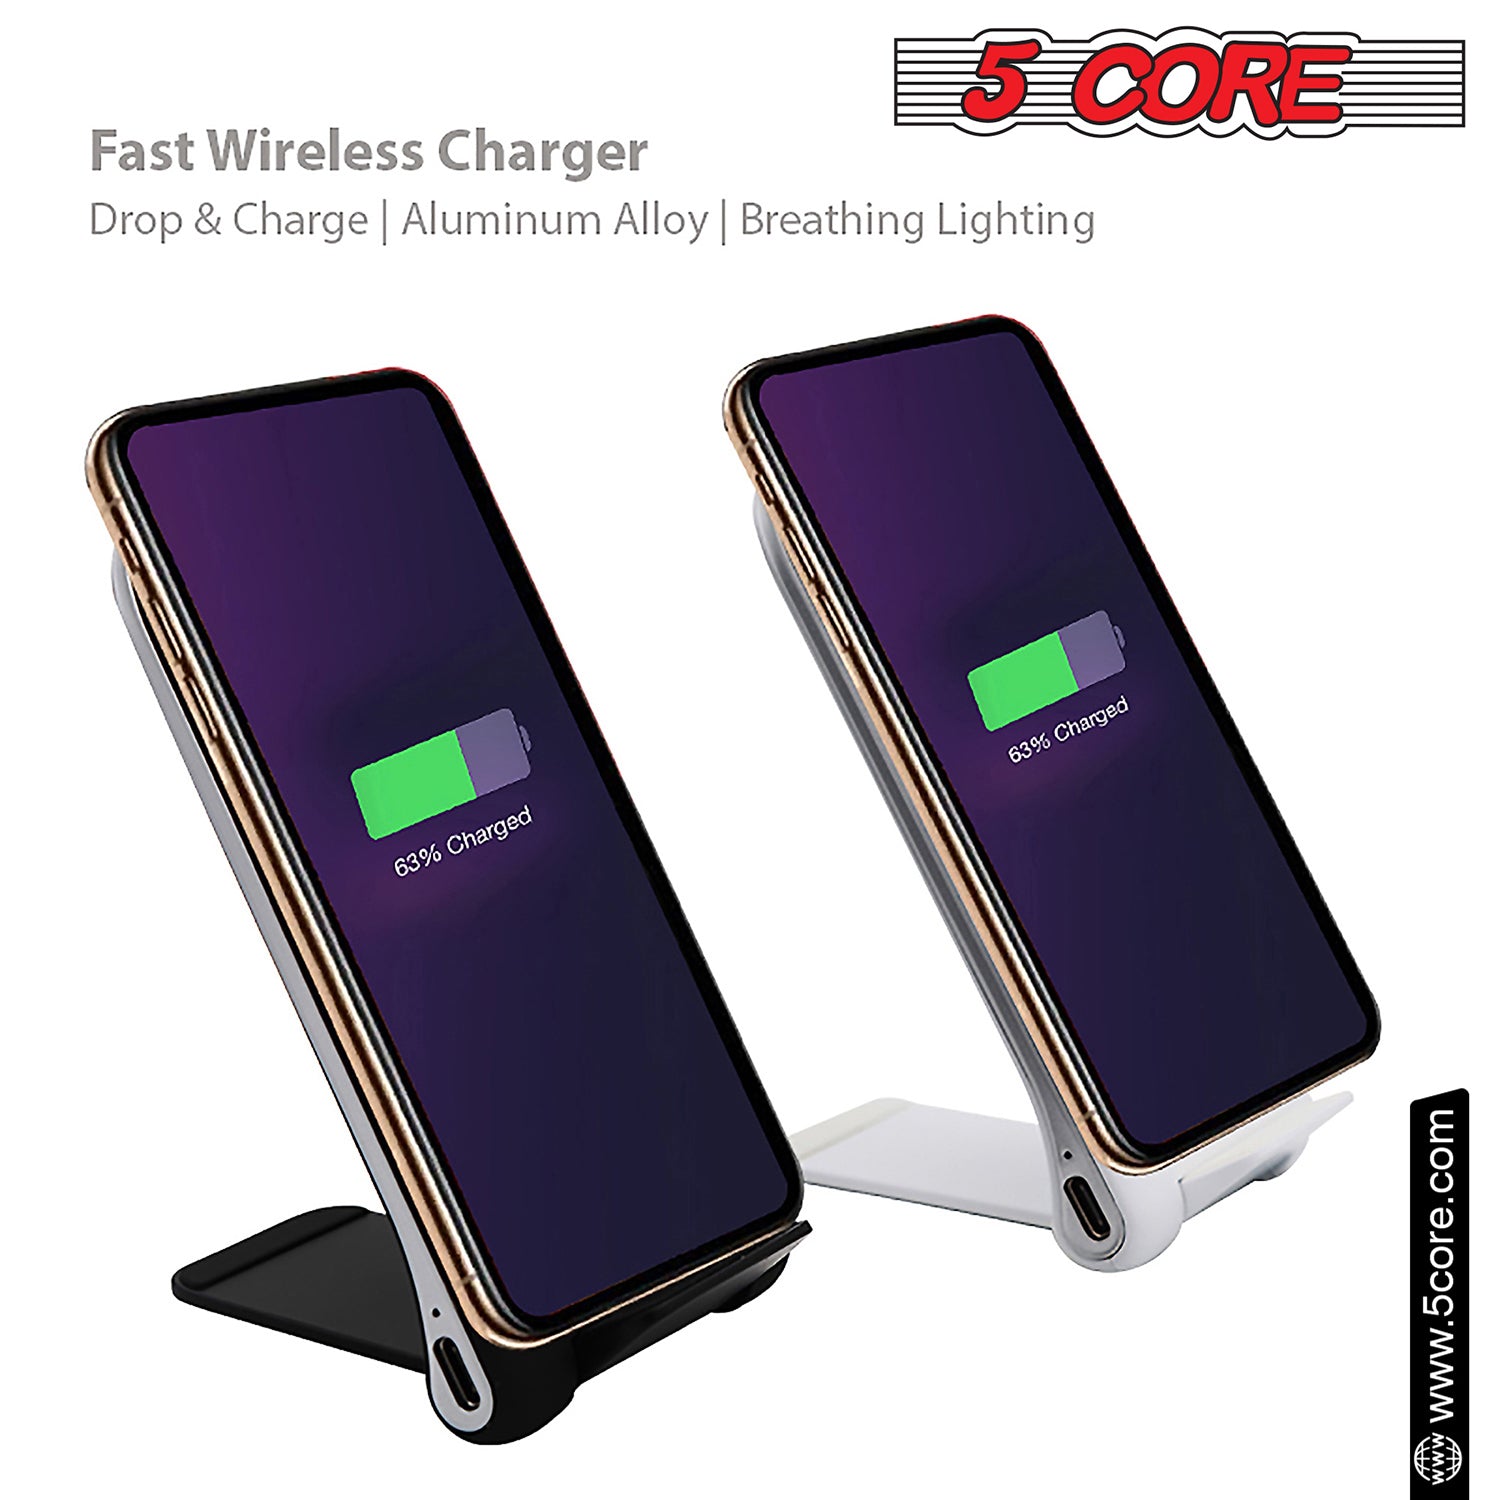 5Core Fast Wireless Charger 2Pack Qi Certified 10W Wireless Charging Stand w Sleep-Friendly Light